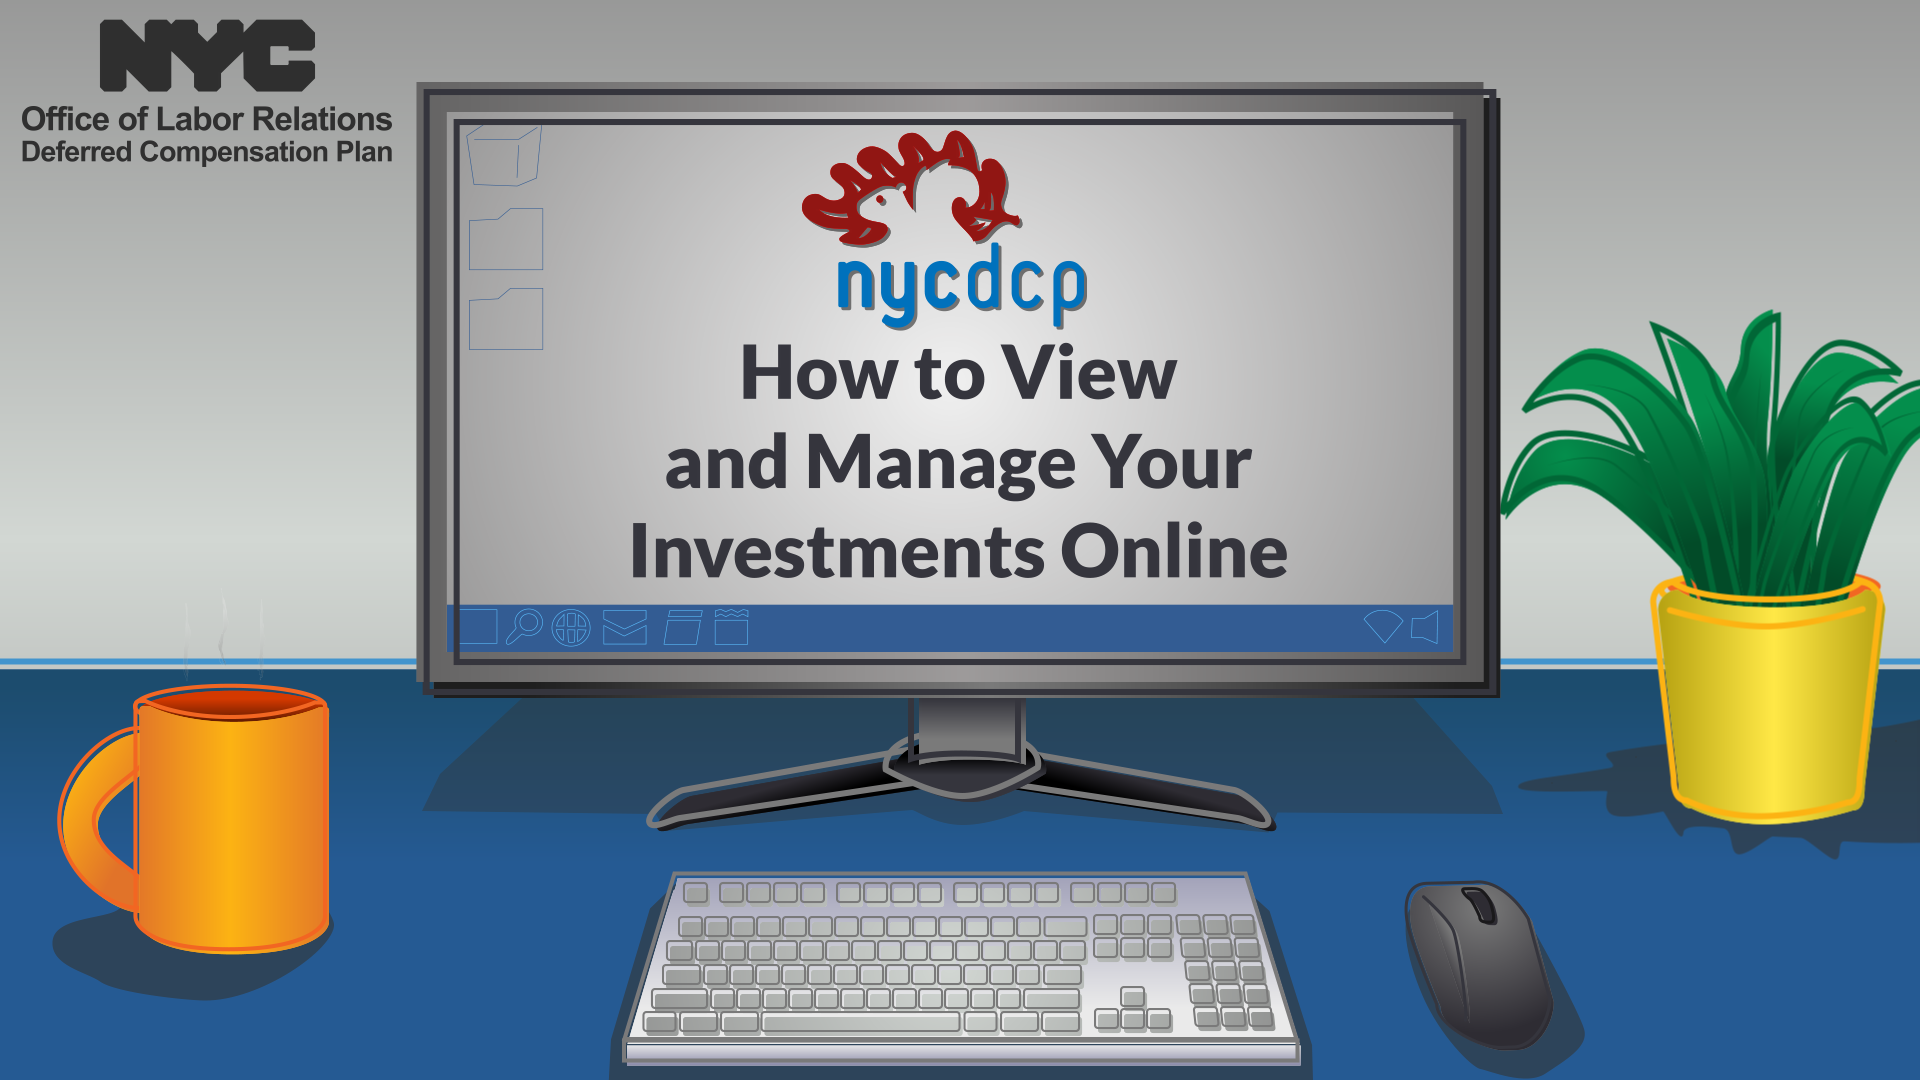 How to View and Manage Your Investments Online